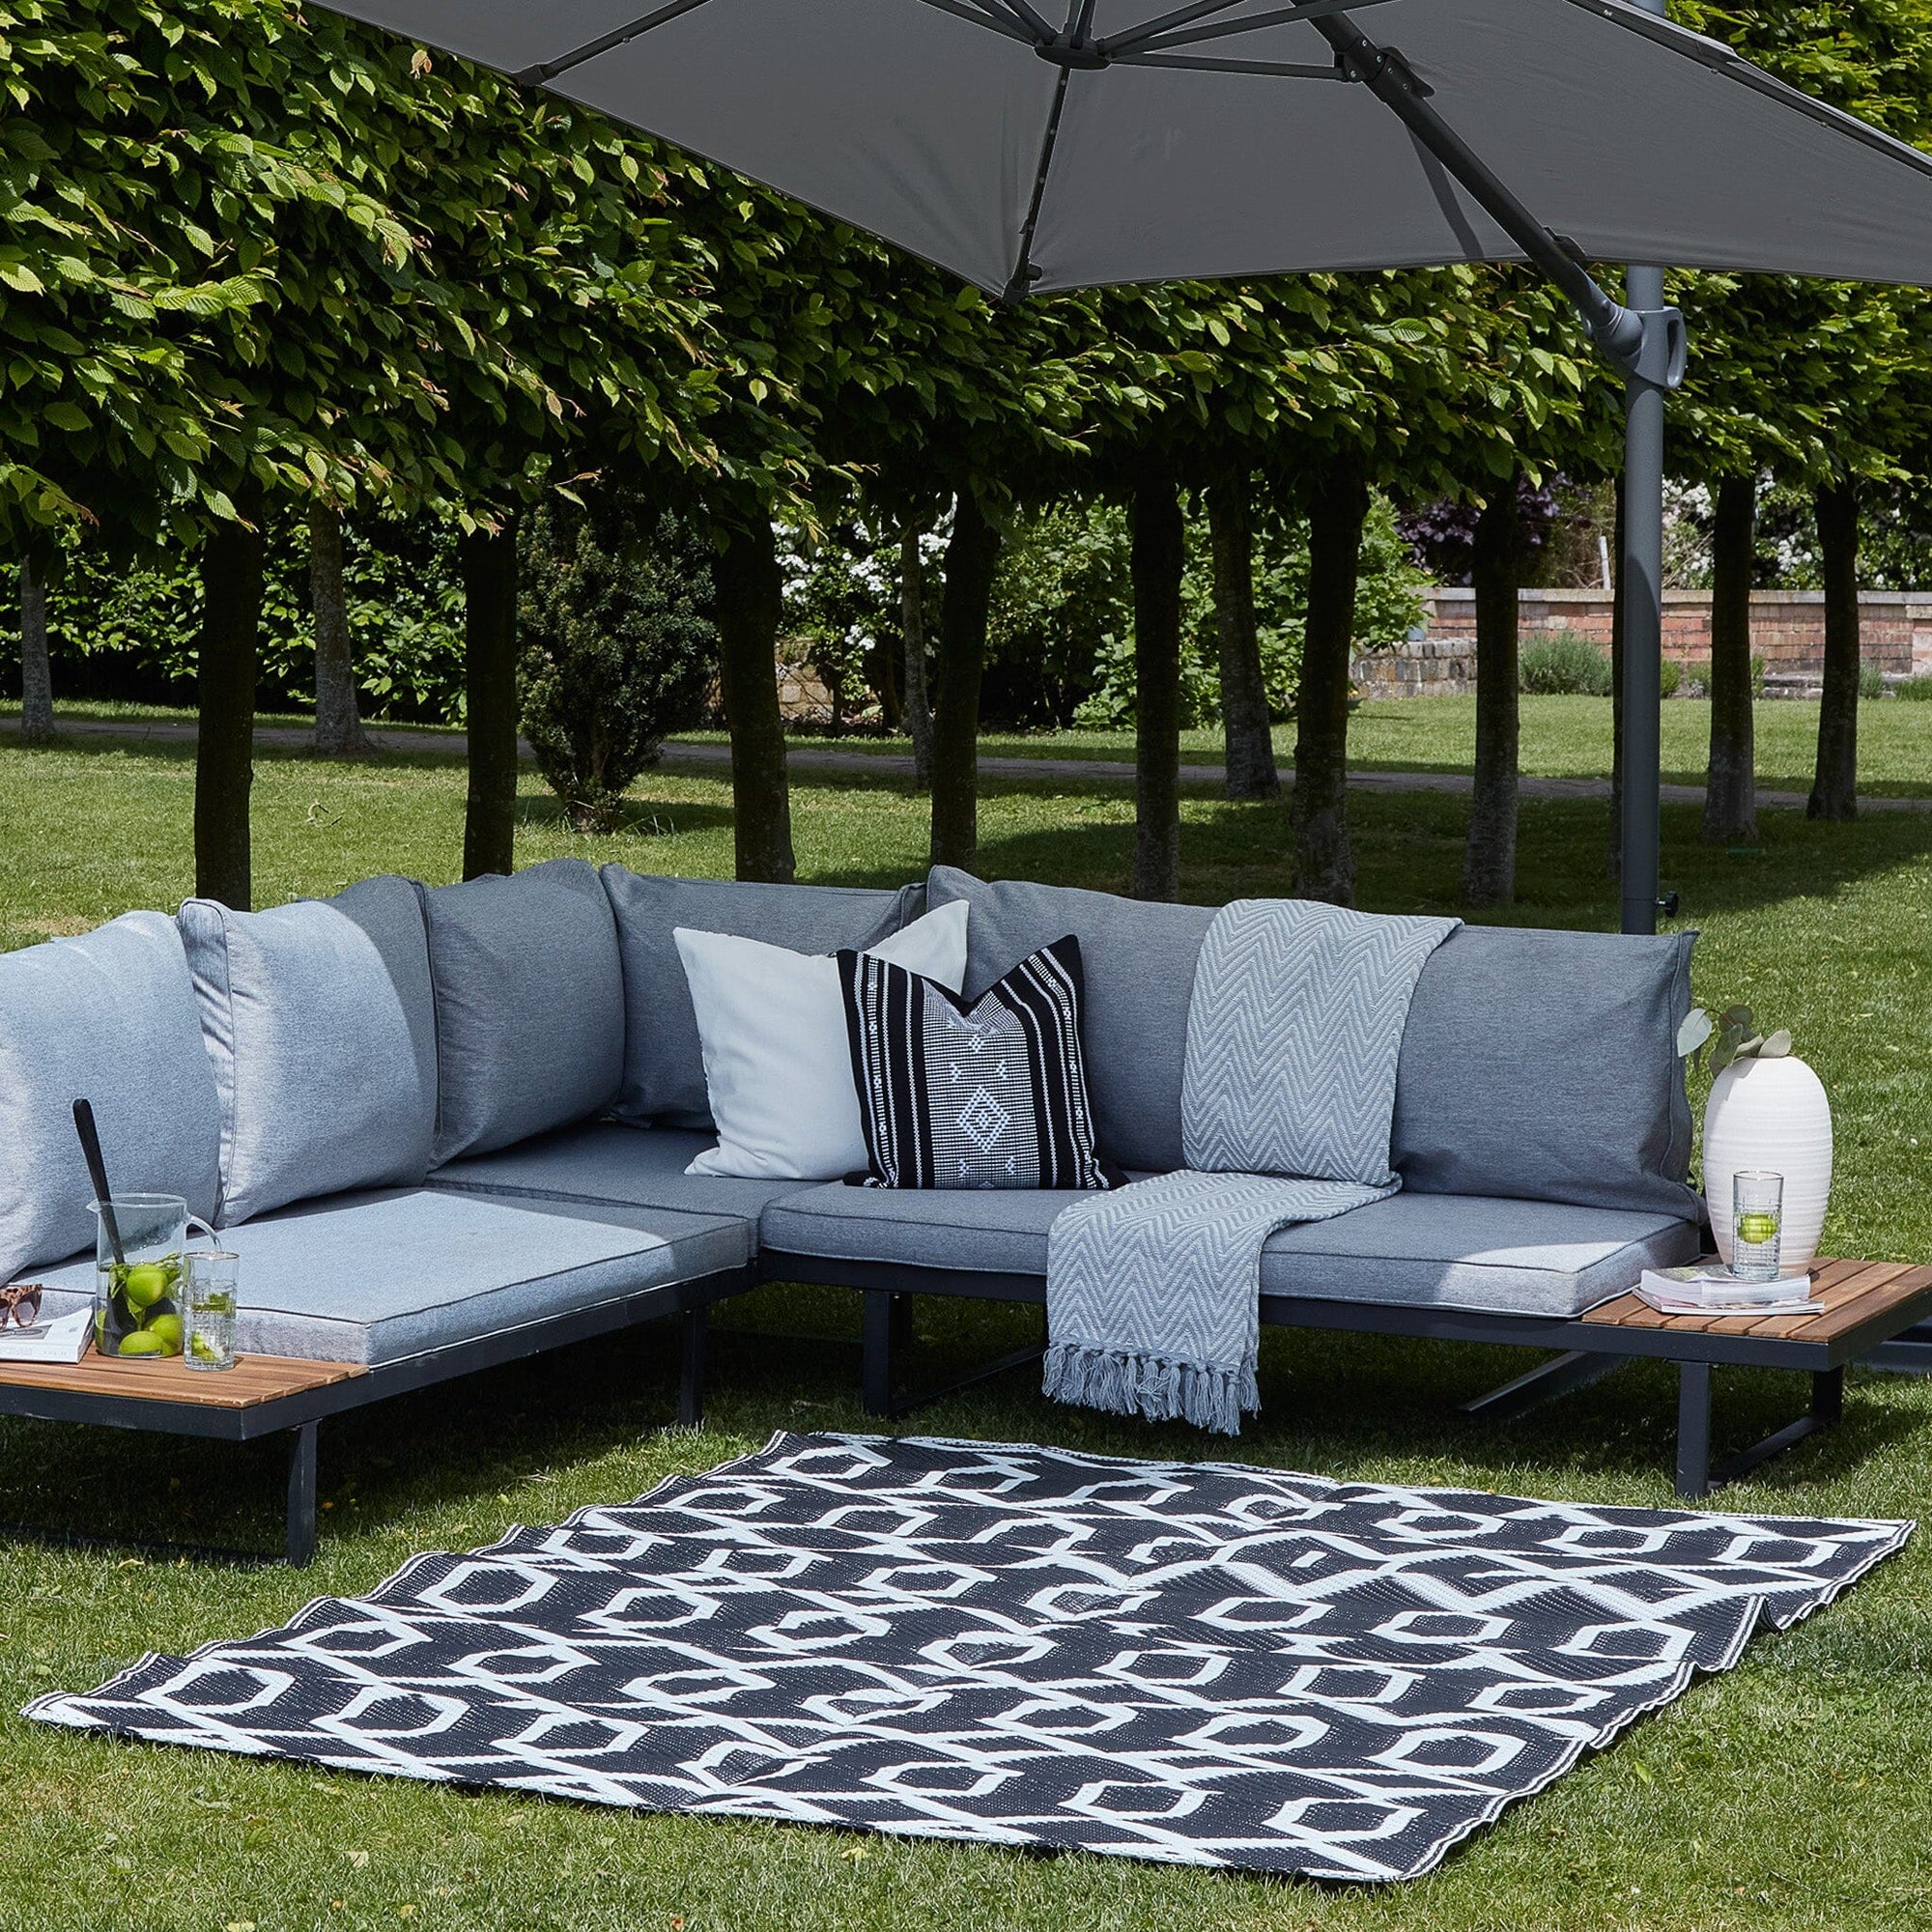 Reversible Outdoor Rug - Black and White - 160cm x 230cm